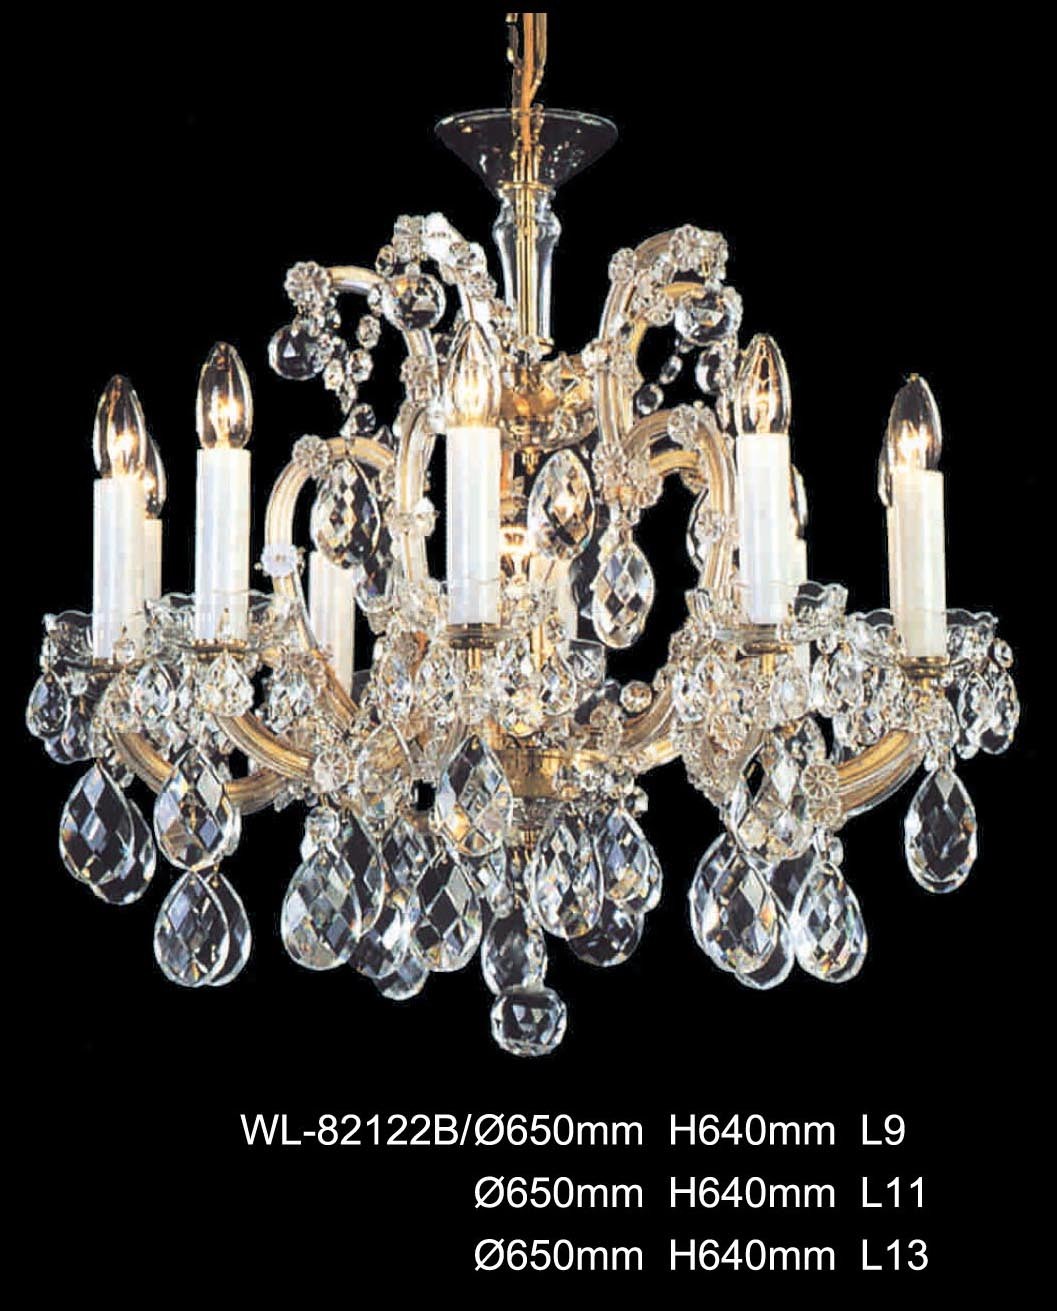 Crystal Chandelier with Glass Chains